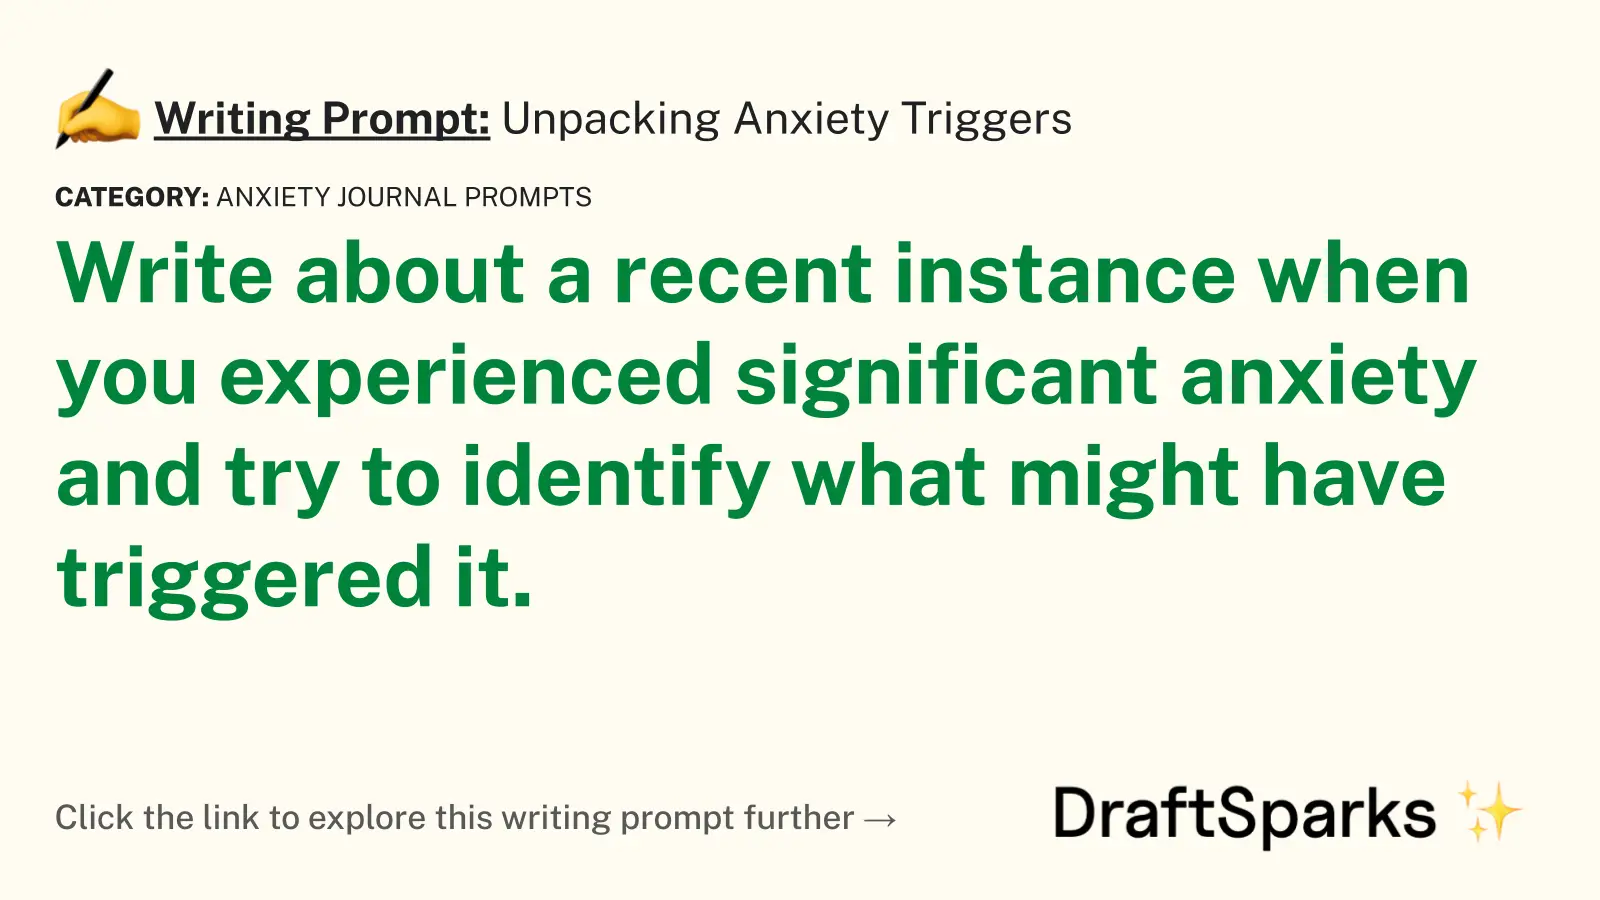 Unpacking Anxiety Triggers